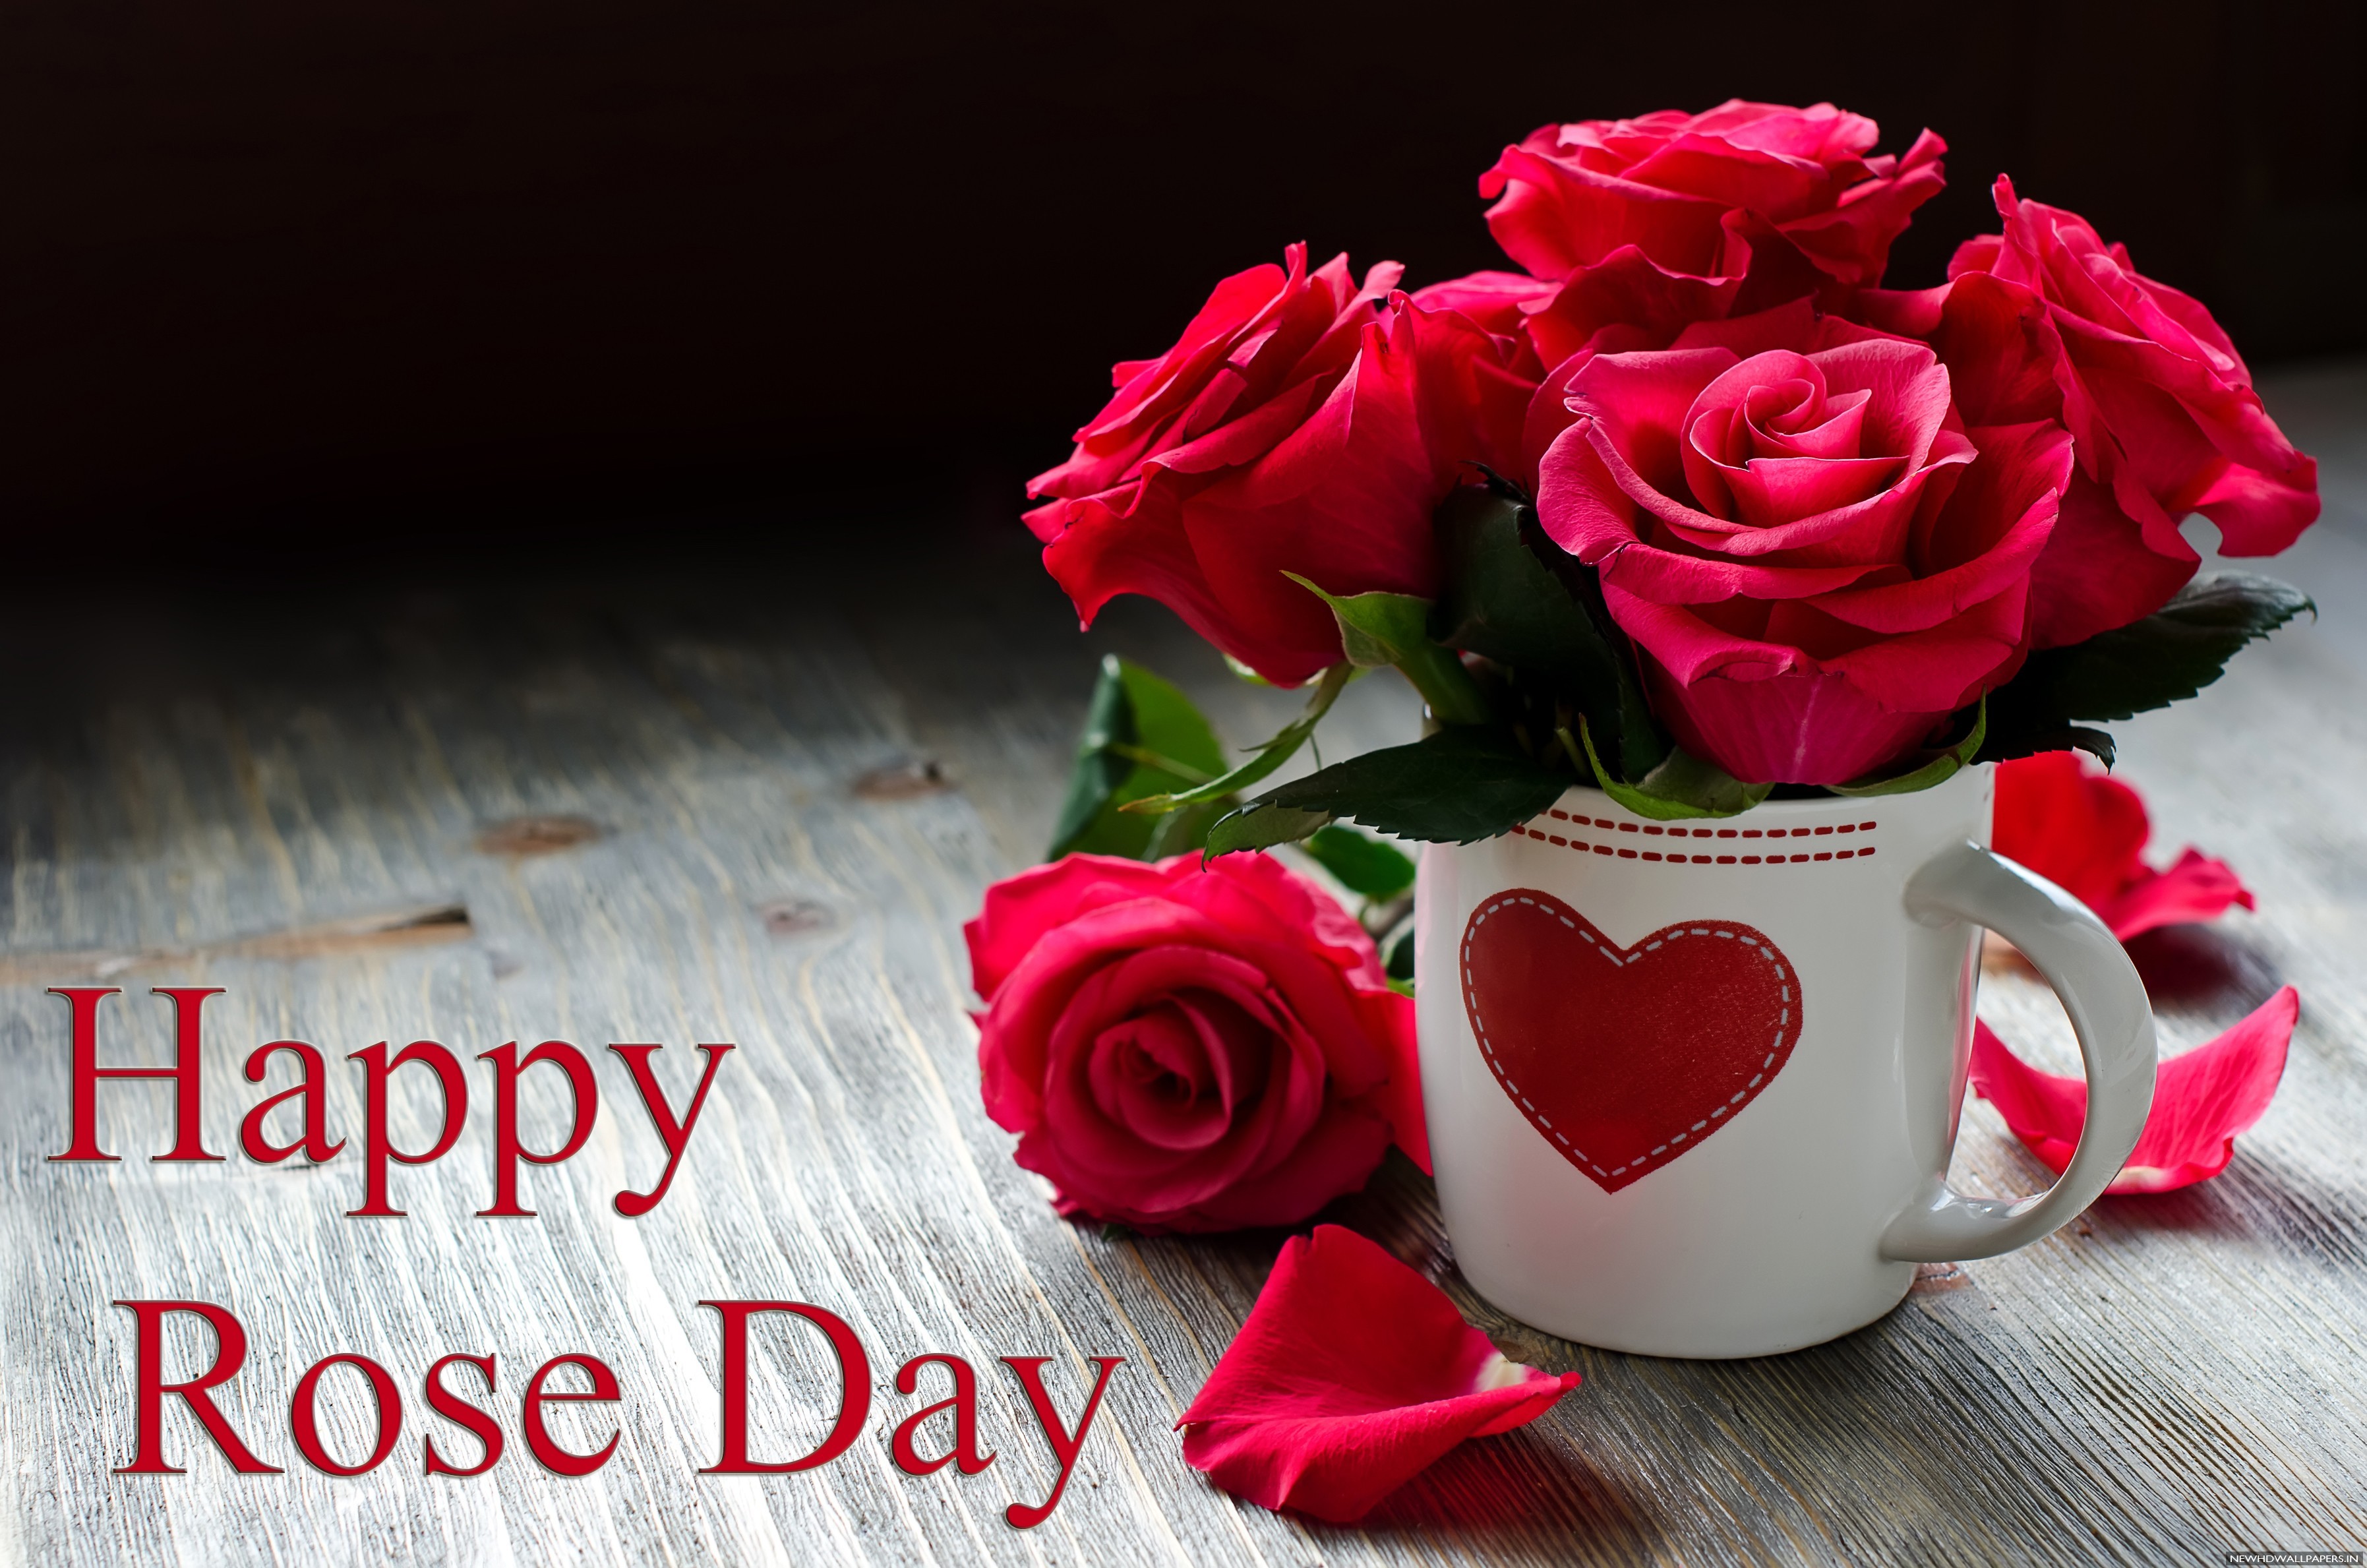 Happy Rose Day Gift Card Wallpaper - Happy Rose Day Whatsapp Dp , HD Wallpaper & Backgrounds